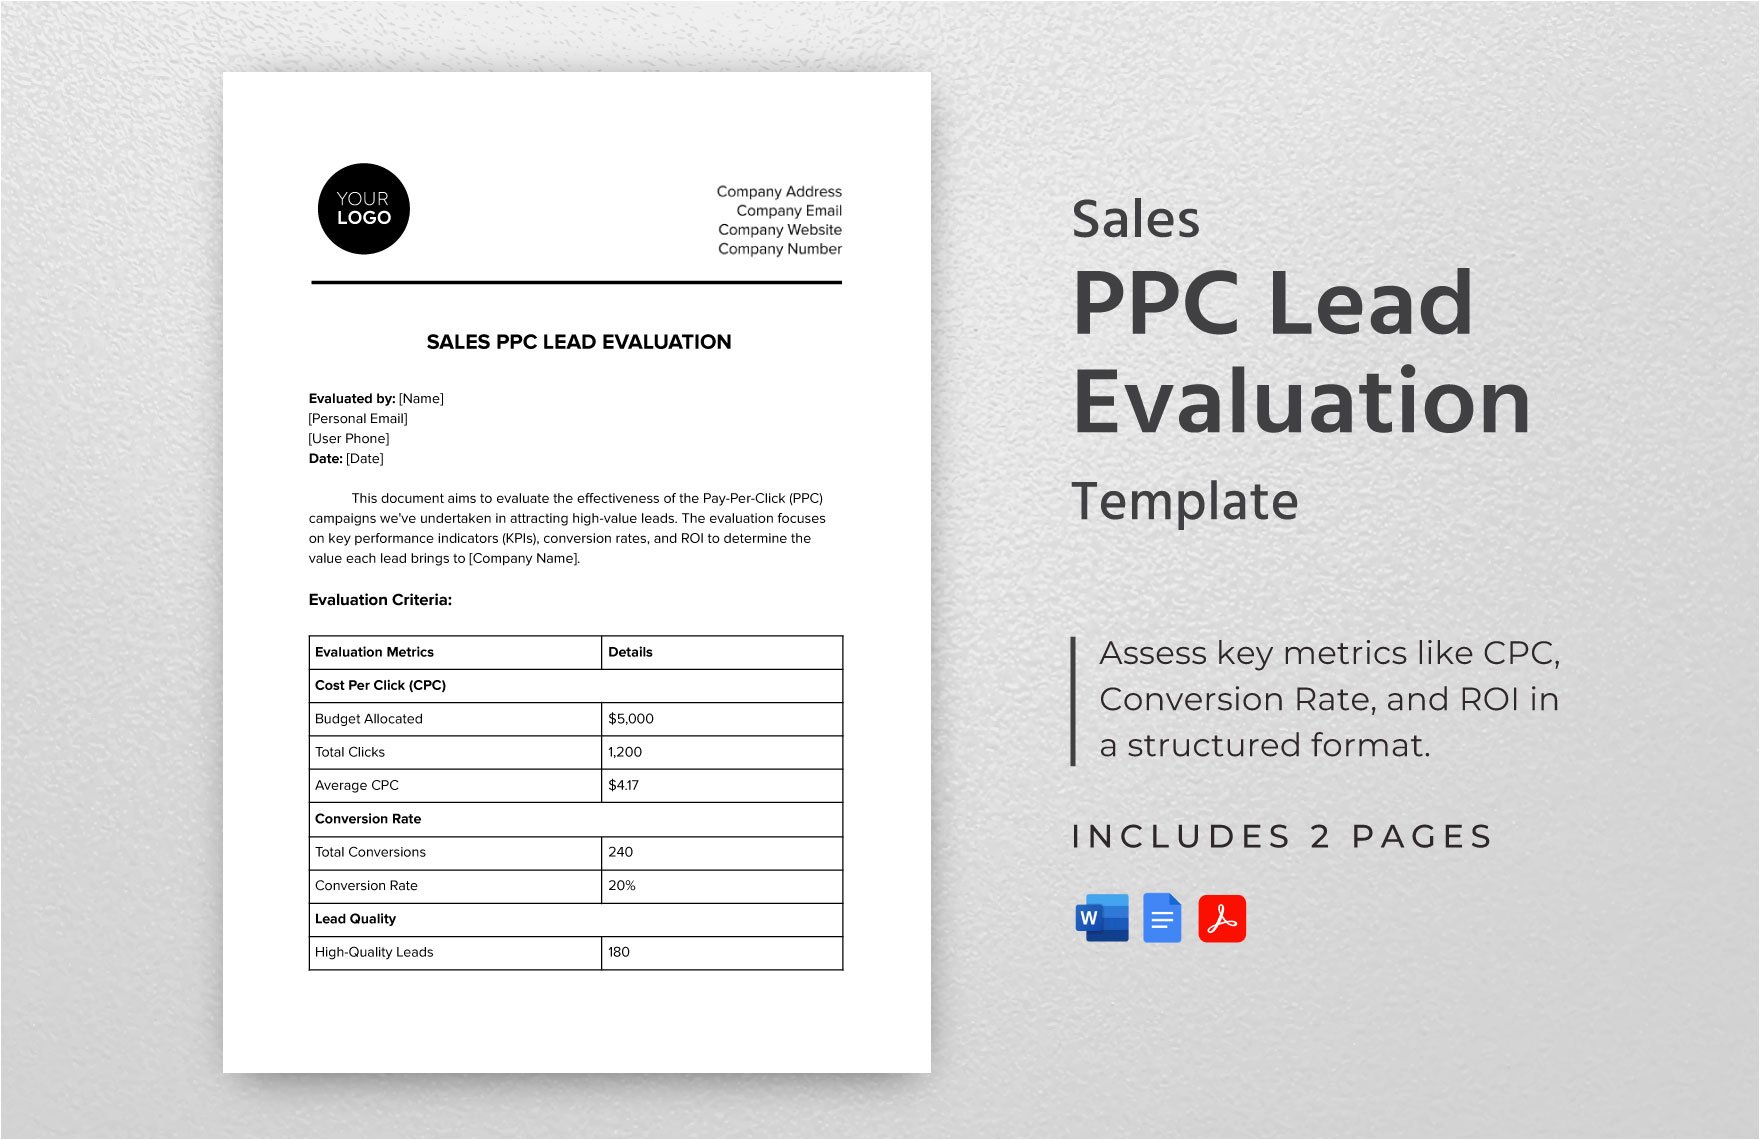 Sales PPC Lead Evaluation Template in Word, Google Docs, PDF